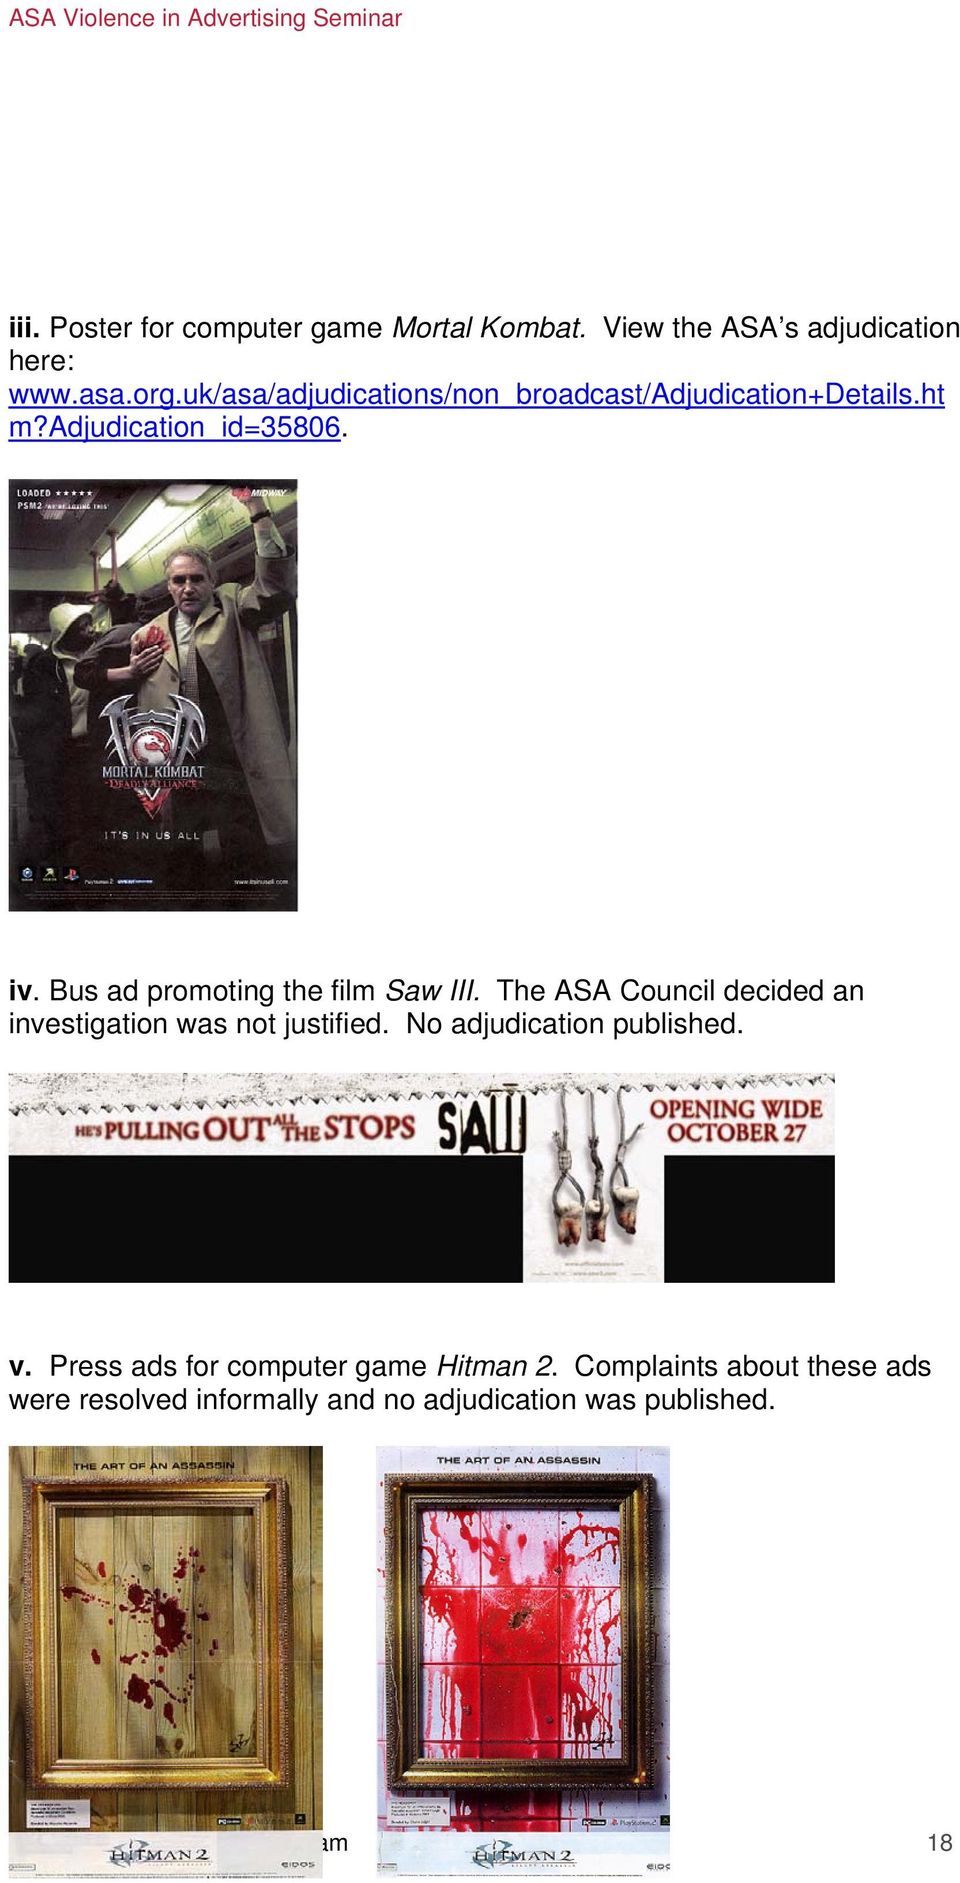 Bus ad promoting the film Saw III. The ASA Council decided an investigation was not justified.